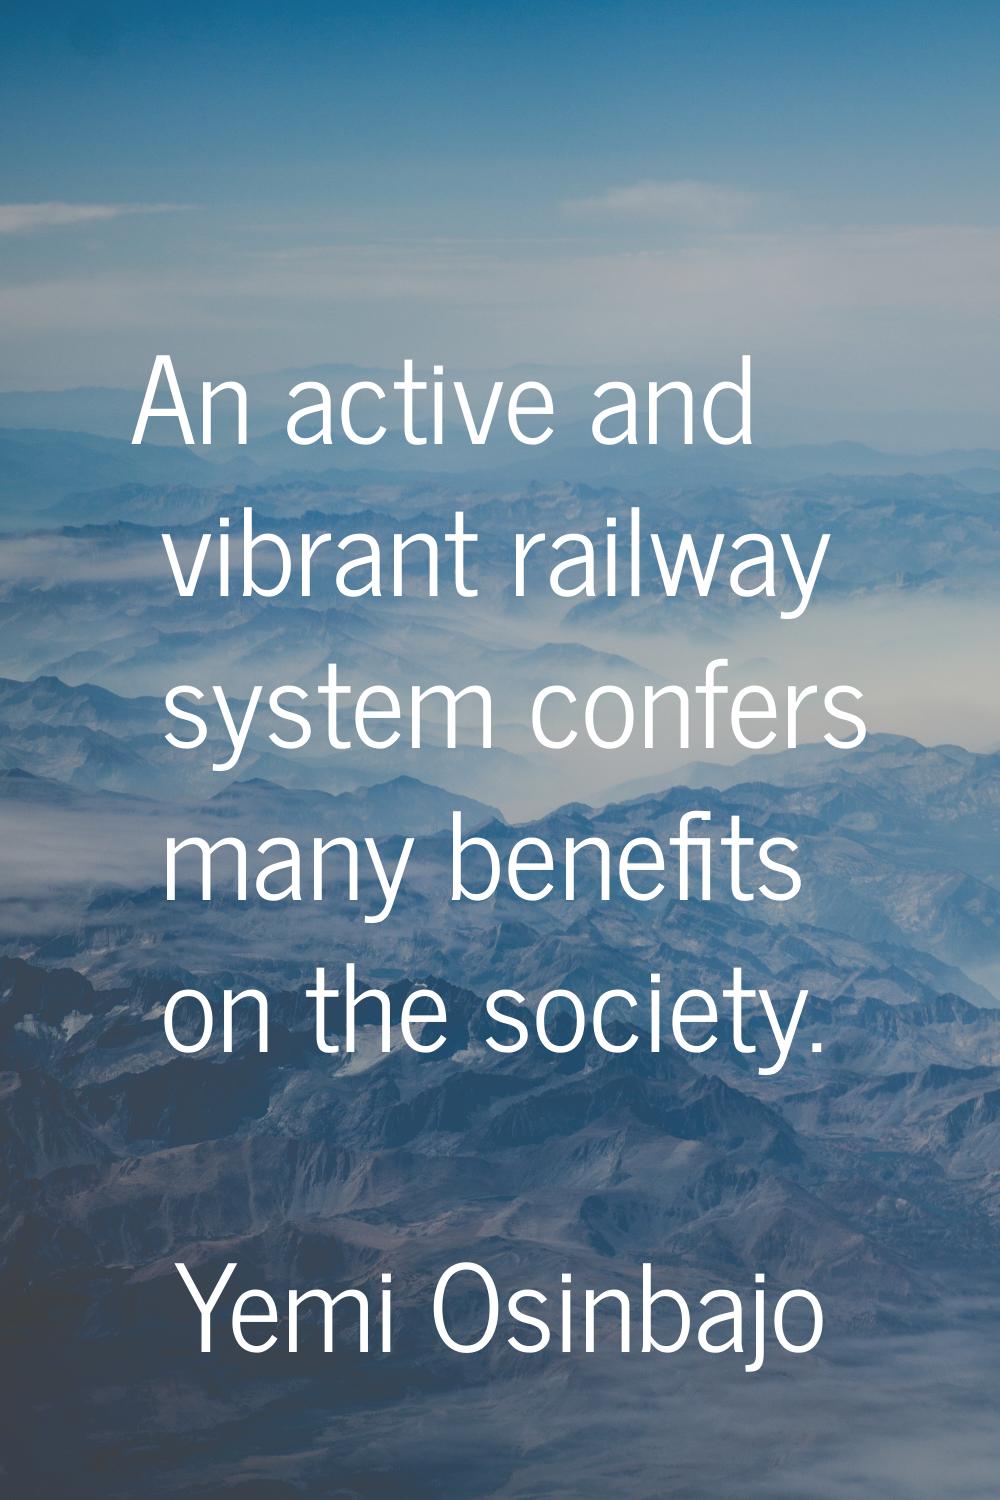 An active and vibrant railway system confers many benefits on the society.